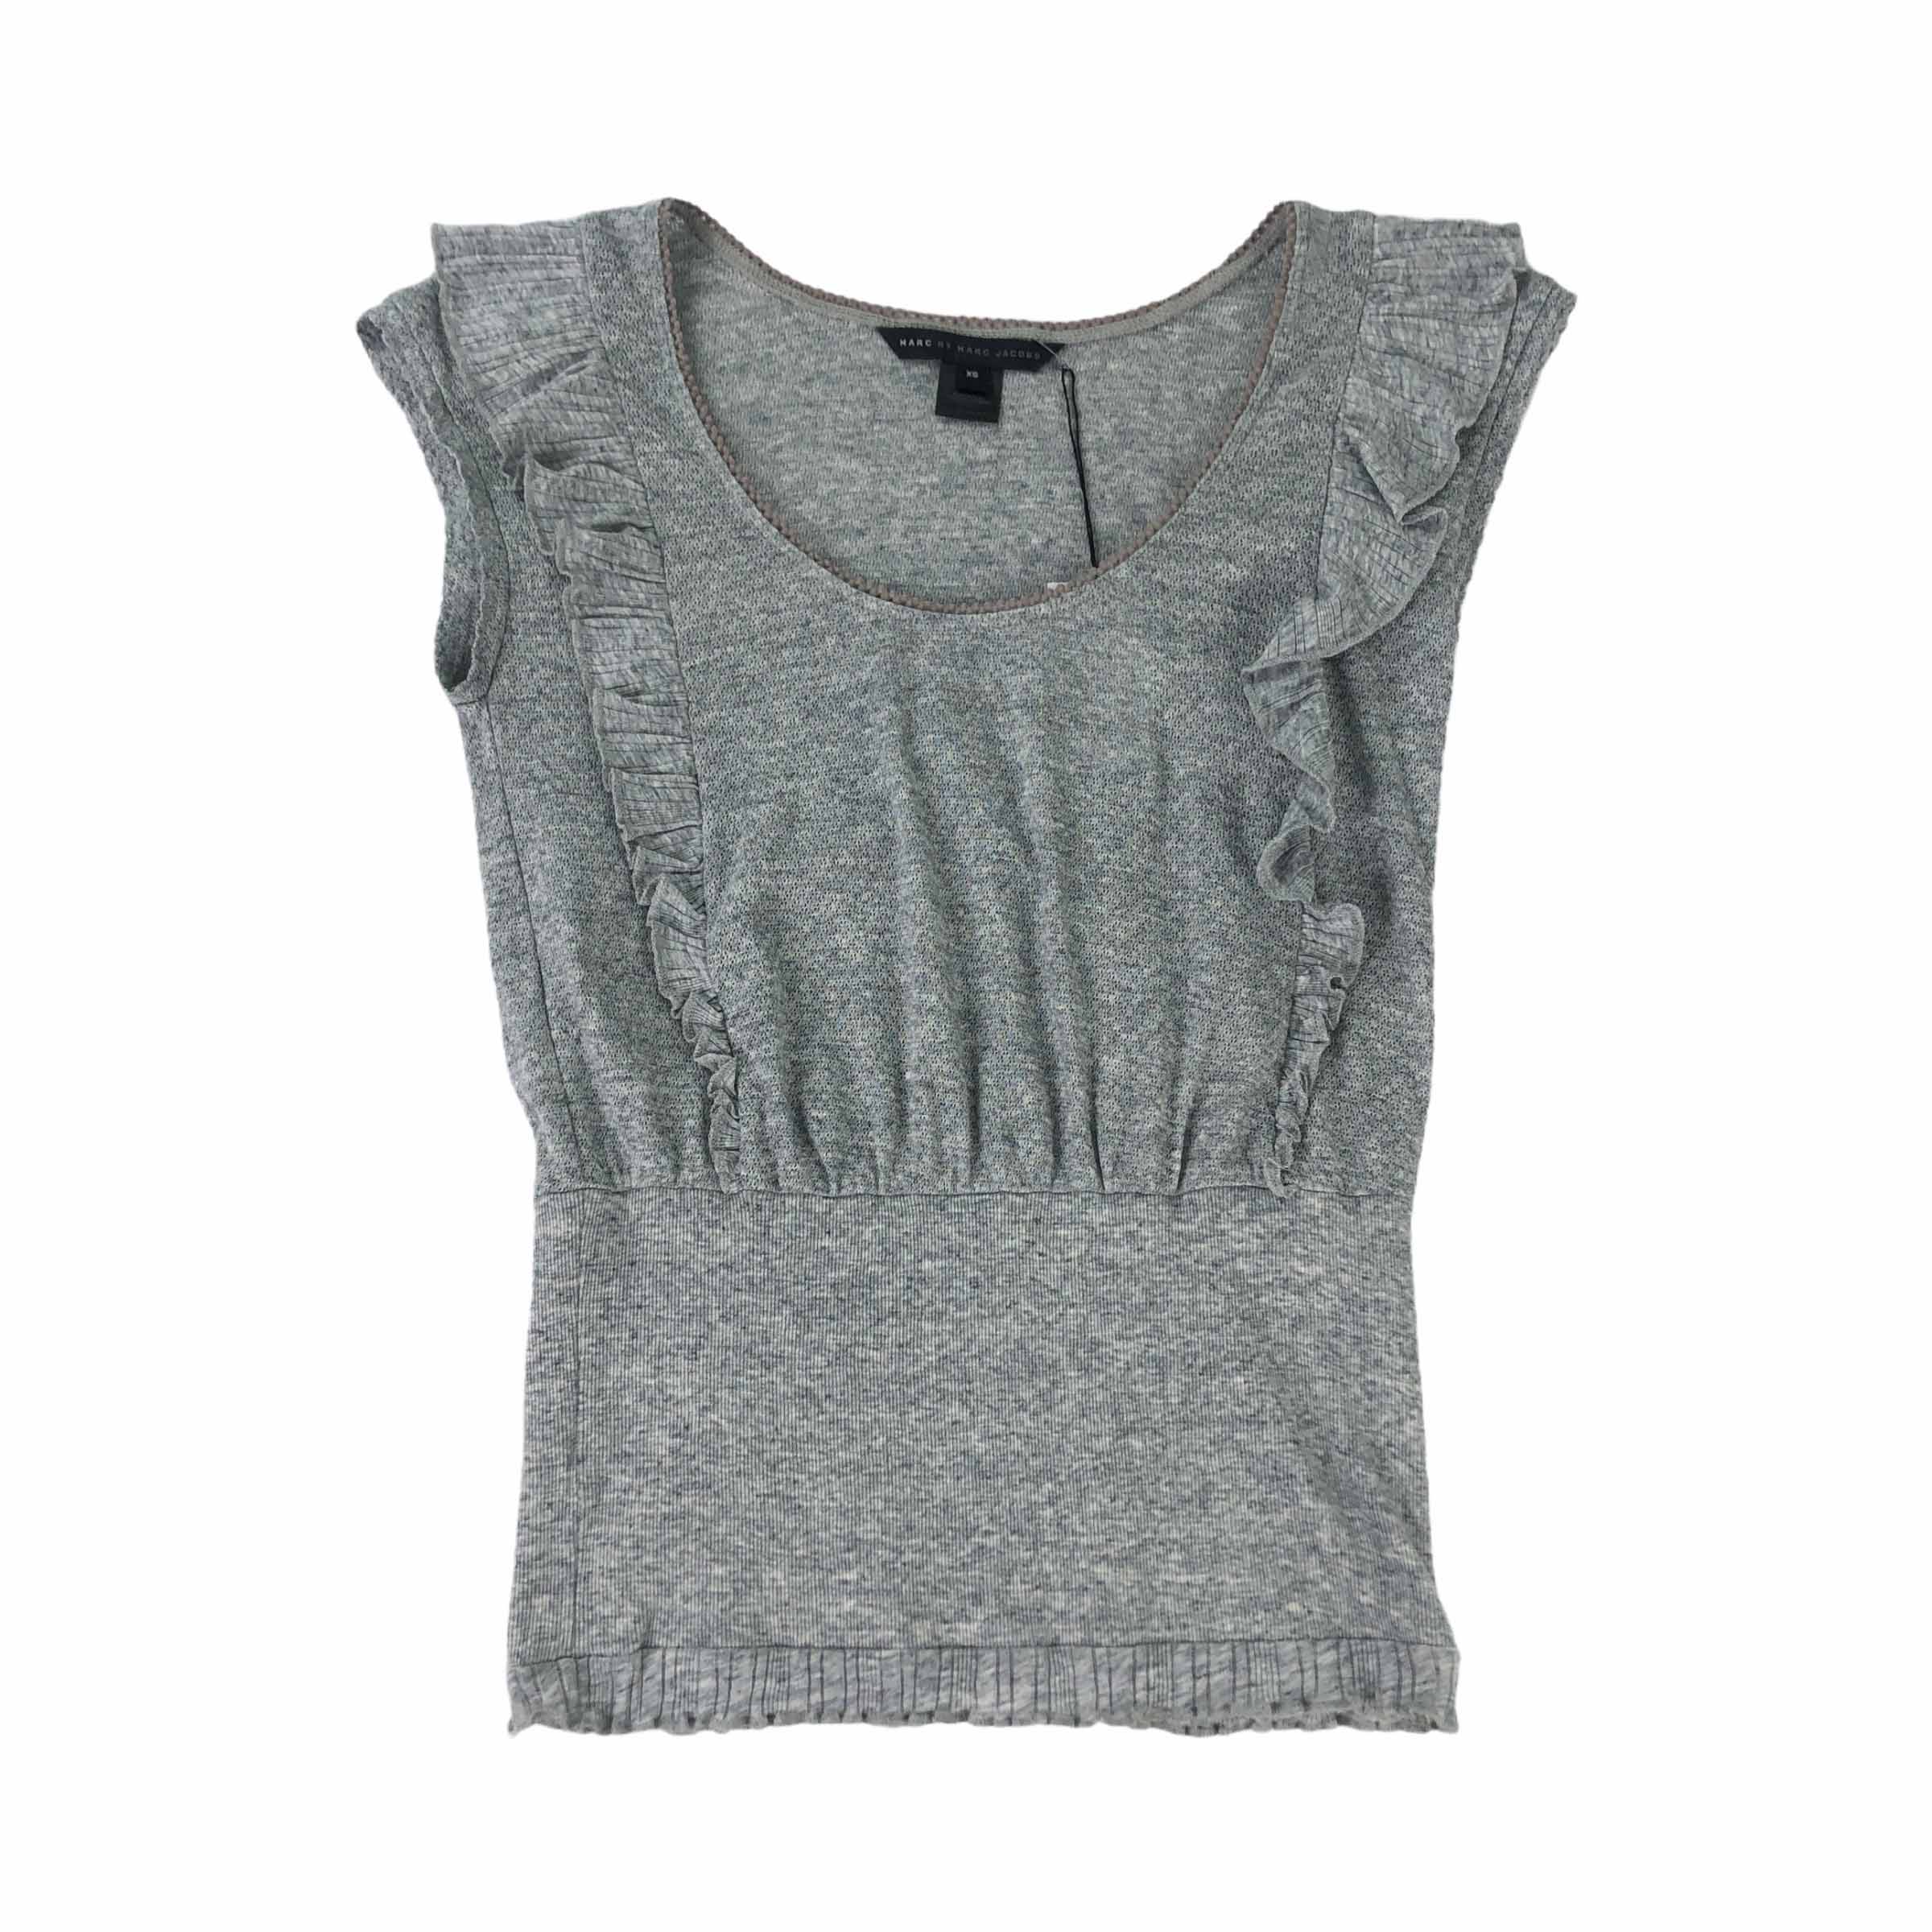 [Marc by Marc Jacobs] Ruffle U Neck Top - Size XS